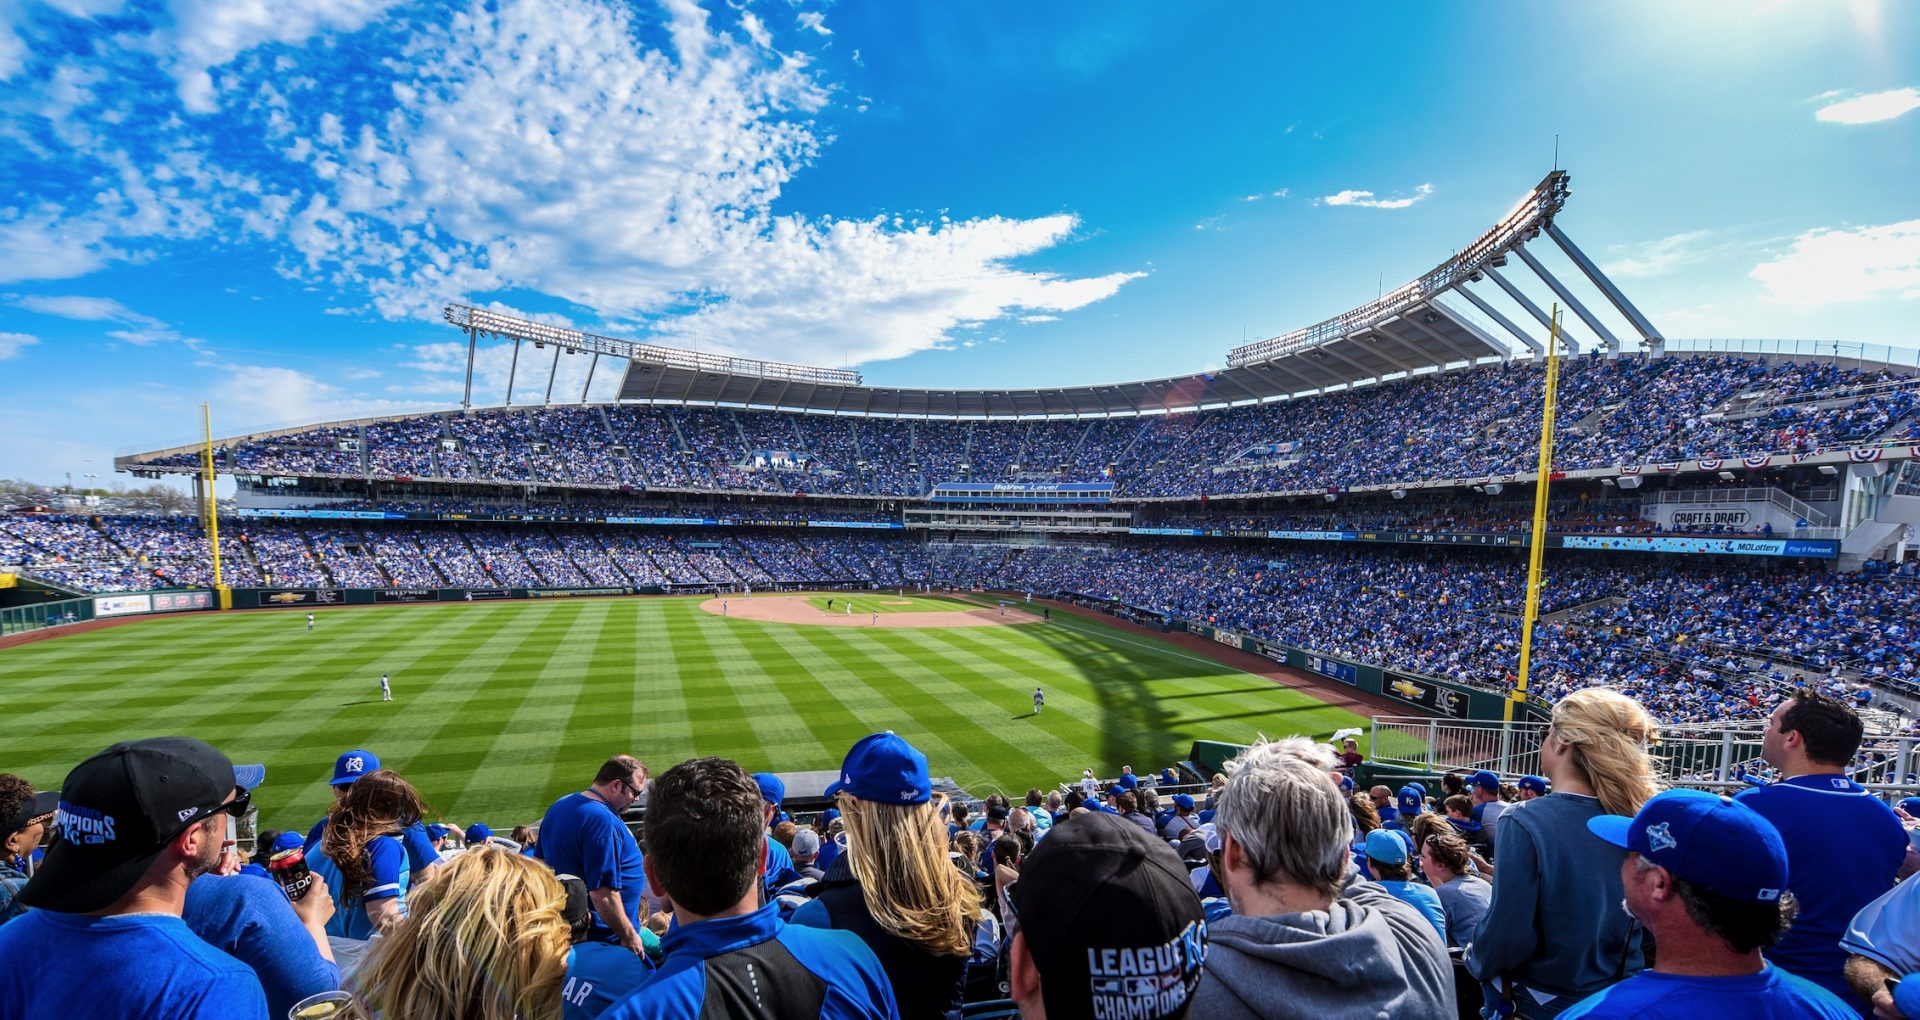 Experience the best in Missouri baseball at a Kansas City Royals game